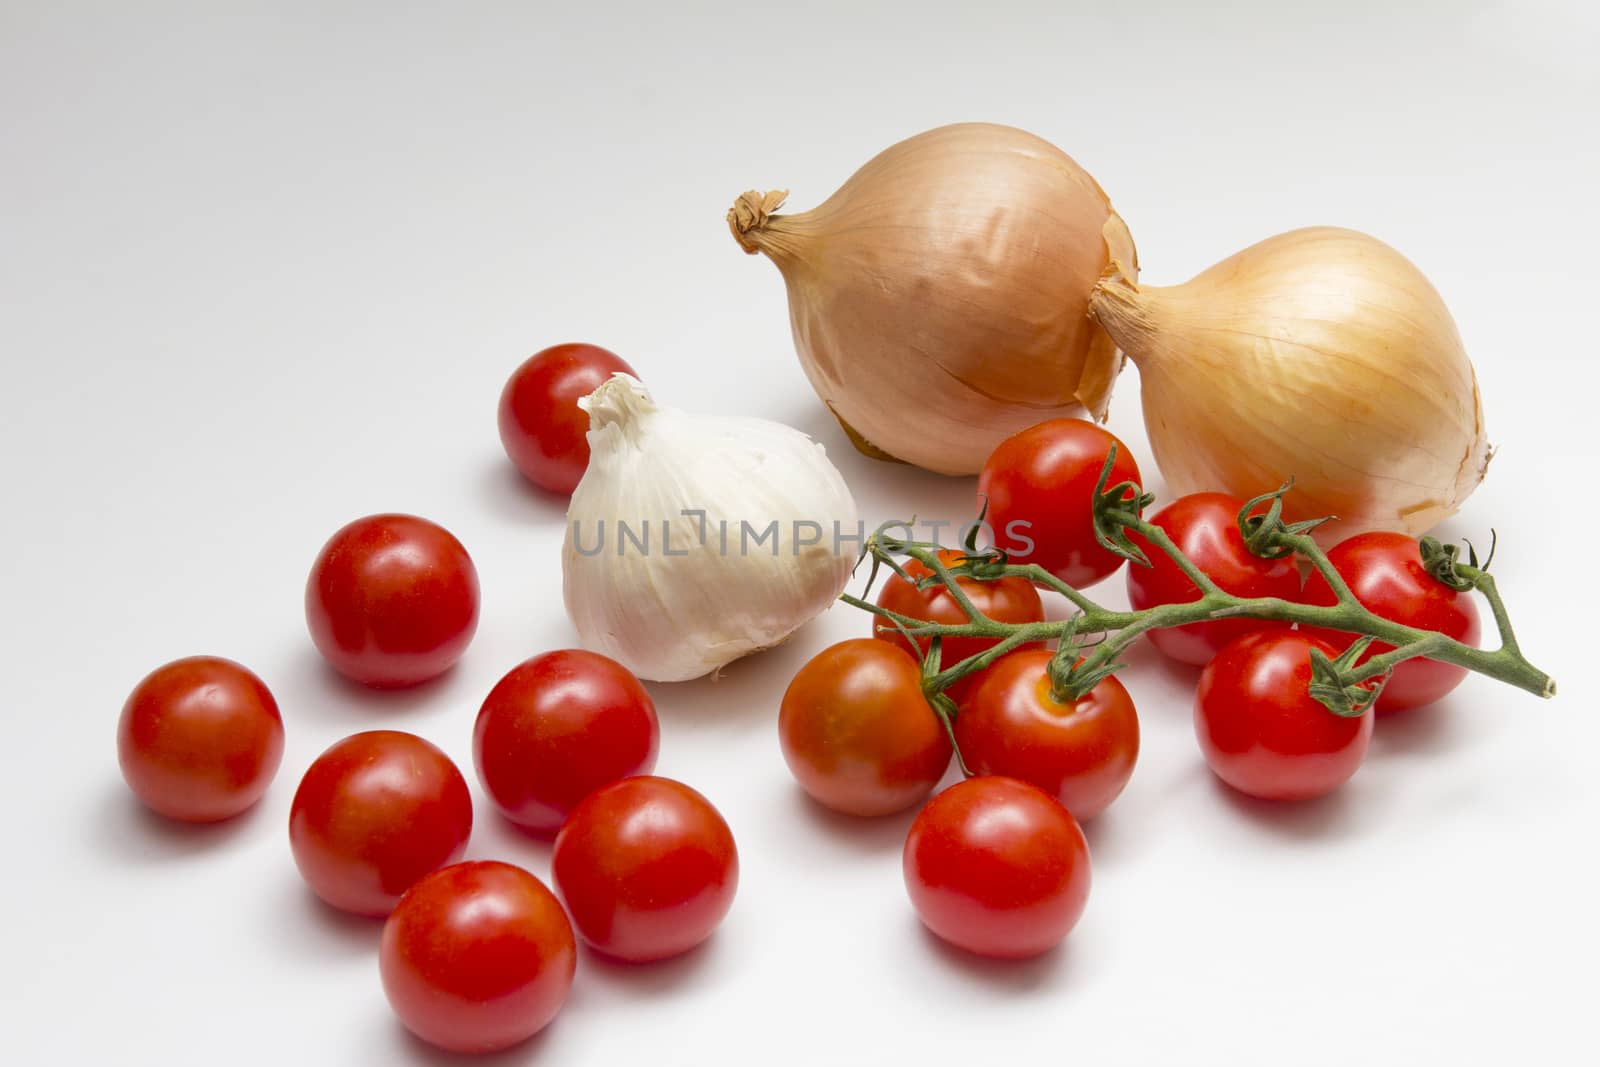 An arrangement of onons, tomatoes and garlic on a white background